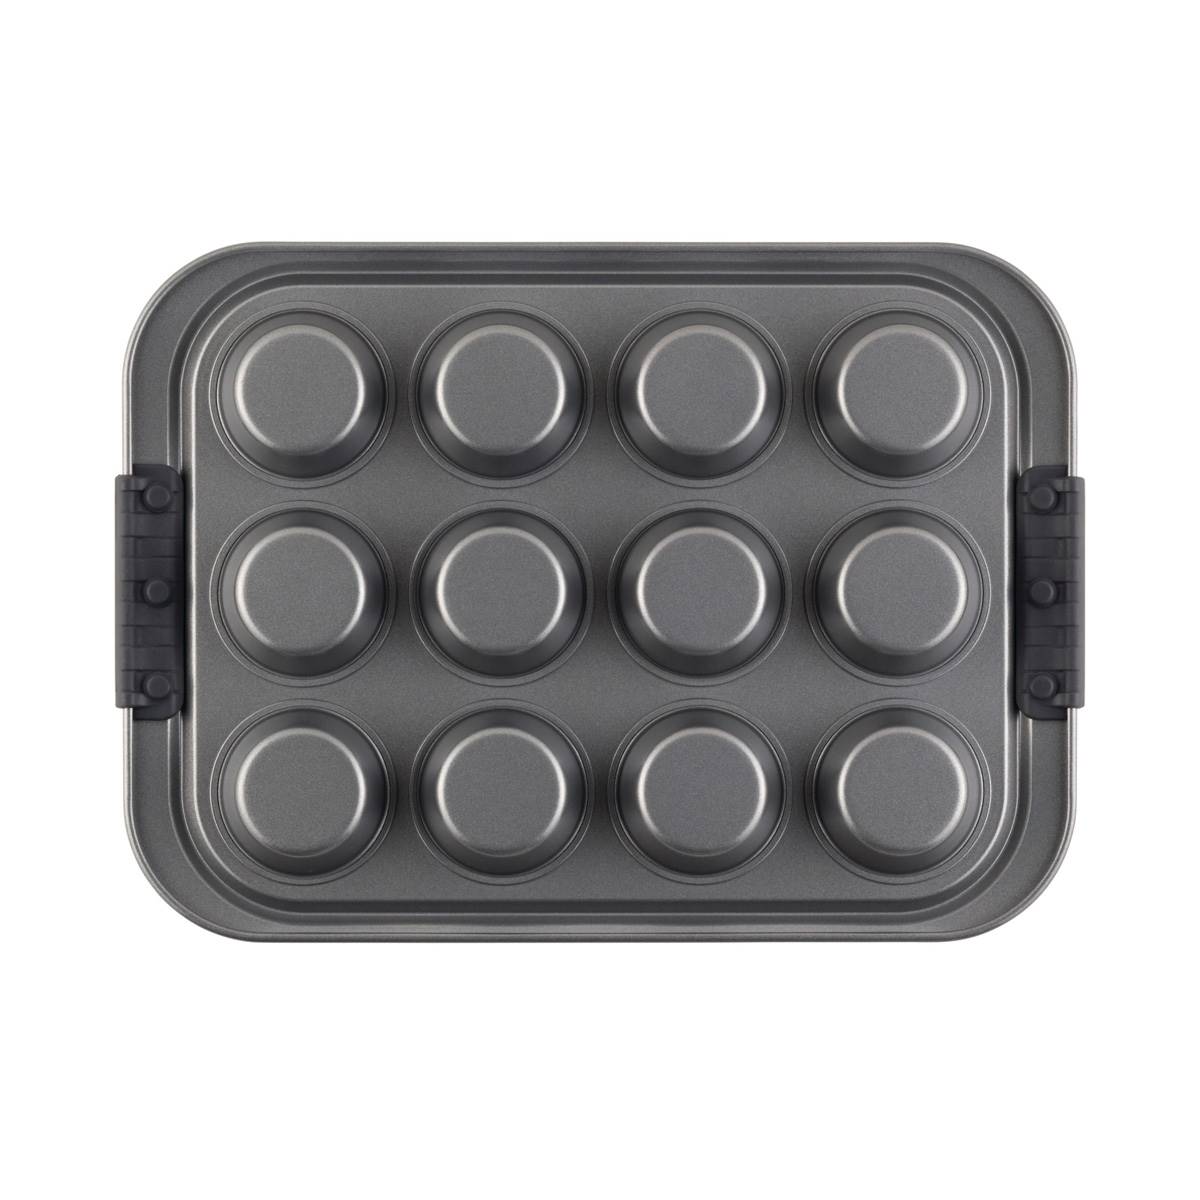 Anolon(R) Advanced Nonstick Bakeware Muffin Pan With Lid -12-Cup